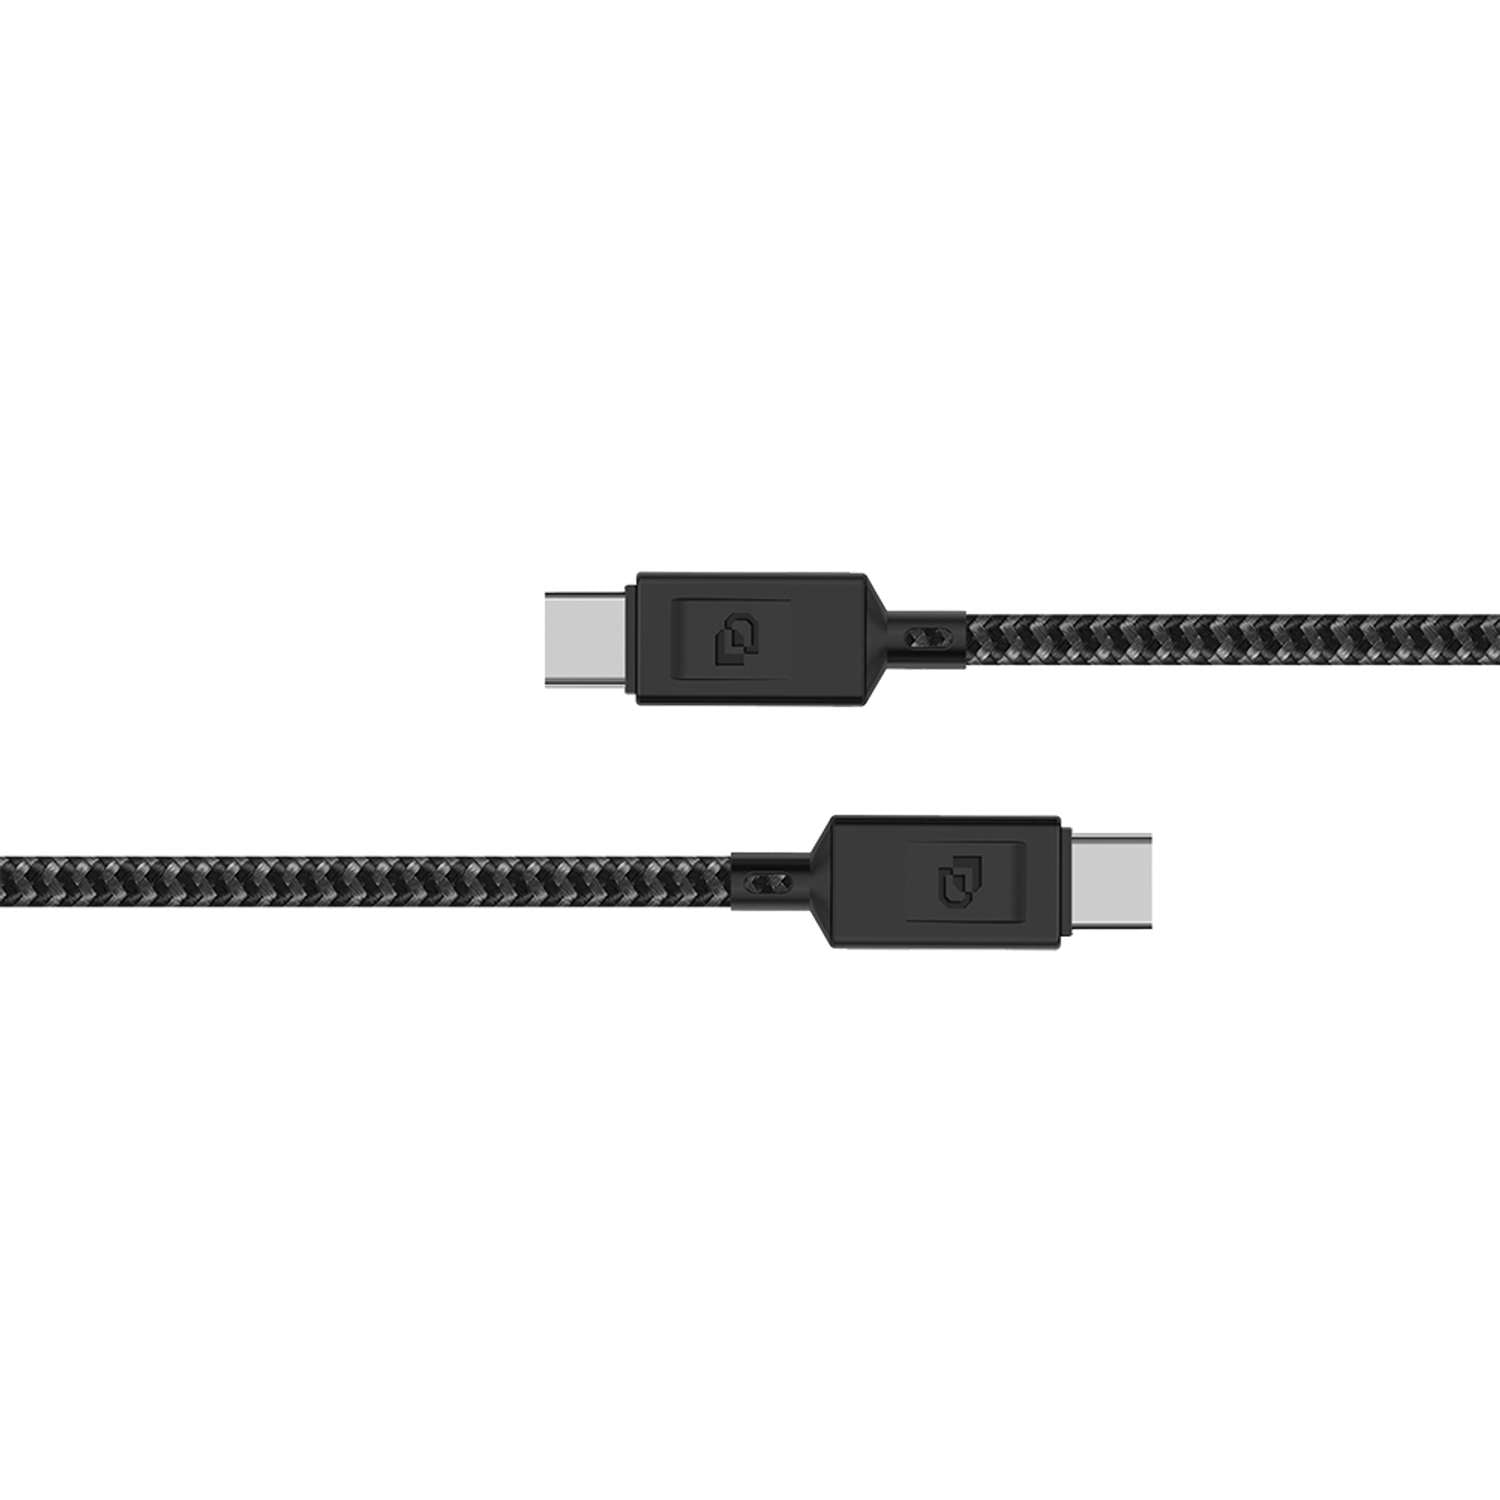 Cable USB-C a USB-C, USB 3.2, 1.5 Mt Rugged Dusted negro